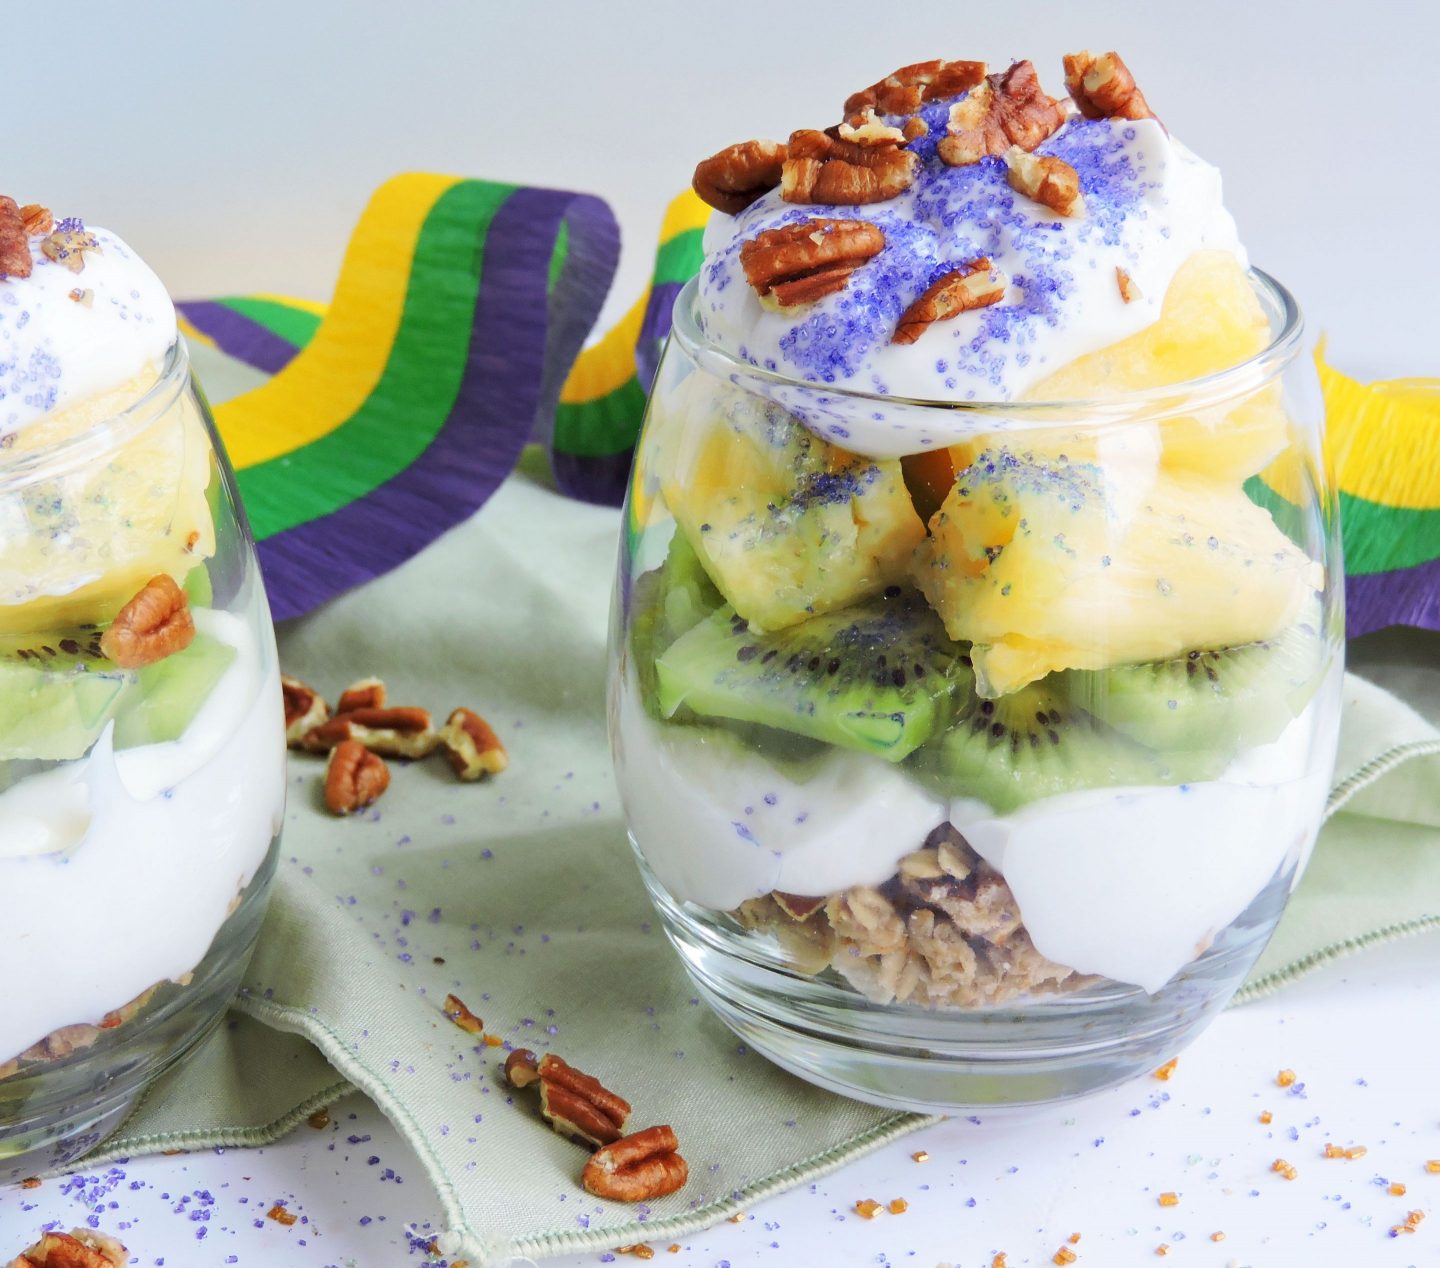 3 Delicious & Healthy Alternatives Inspired by King Cake